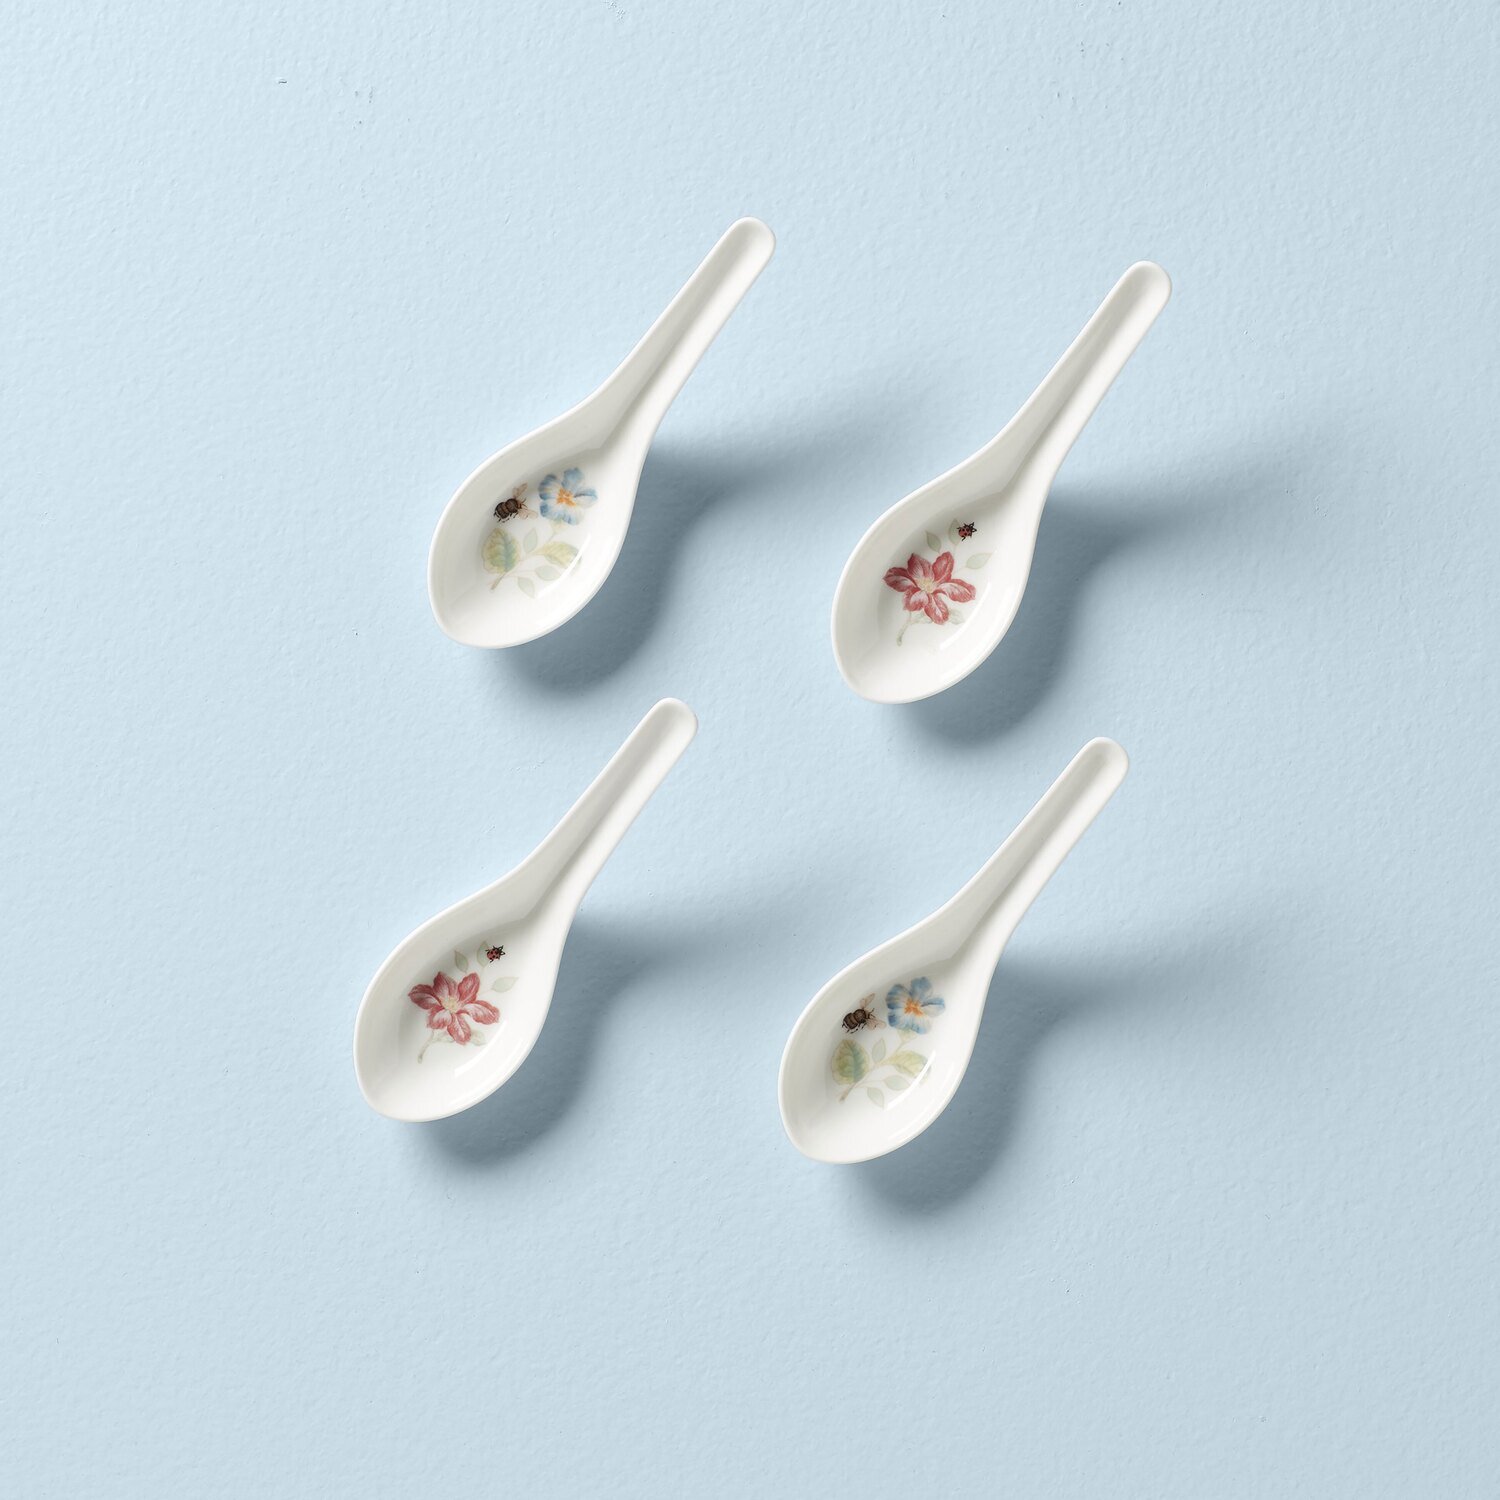 Lenox Butterfly Meadow Soup Spoons Set of 4 Assorted 892529